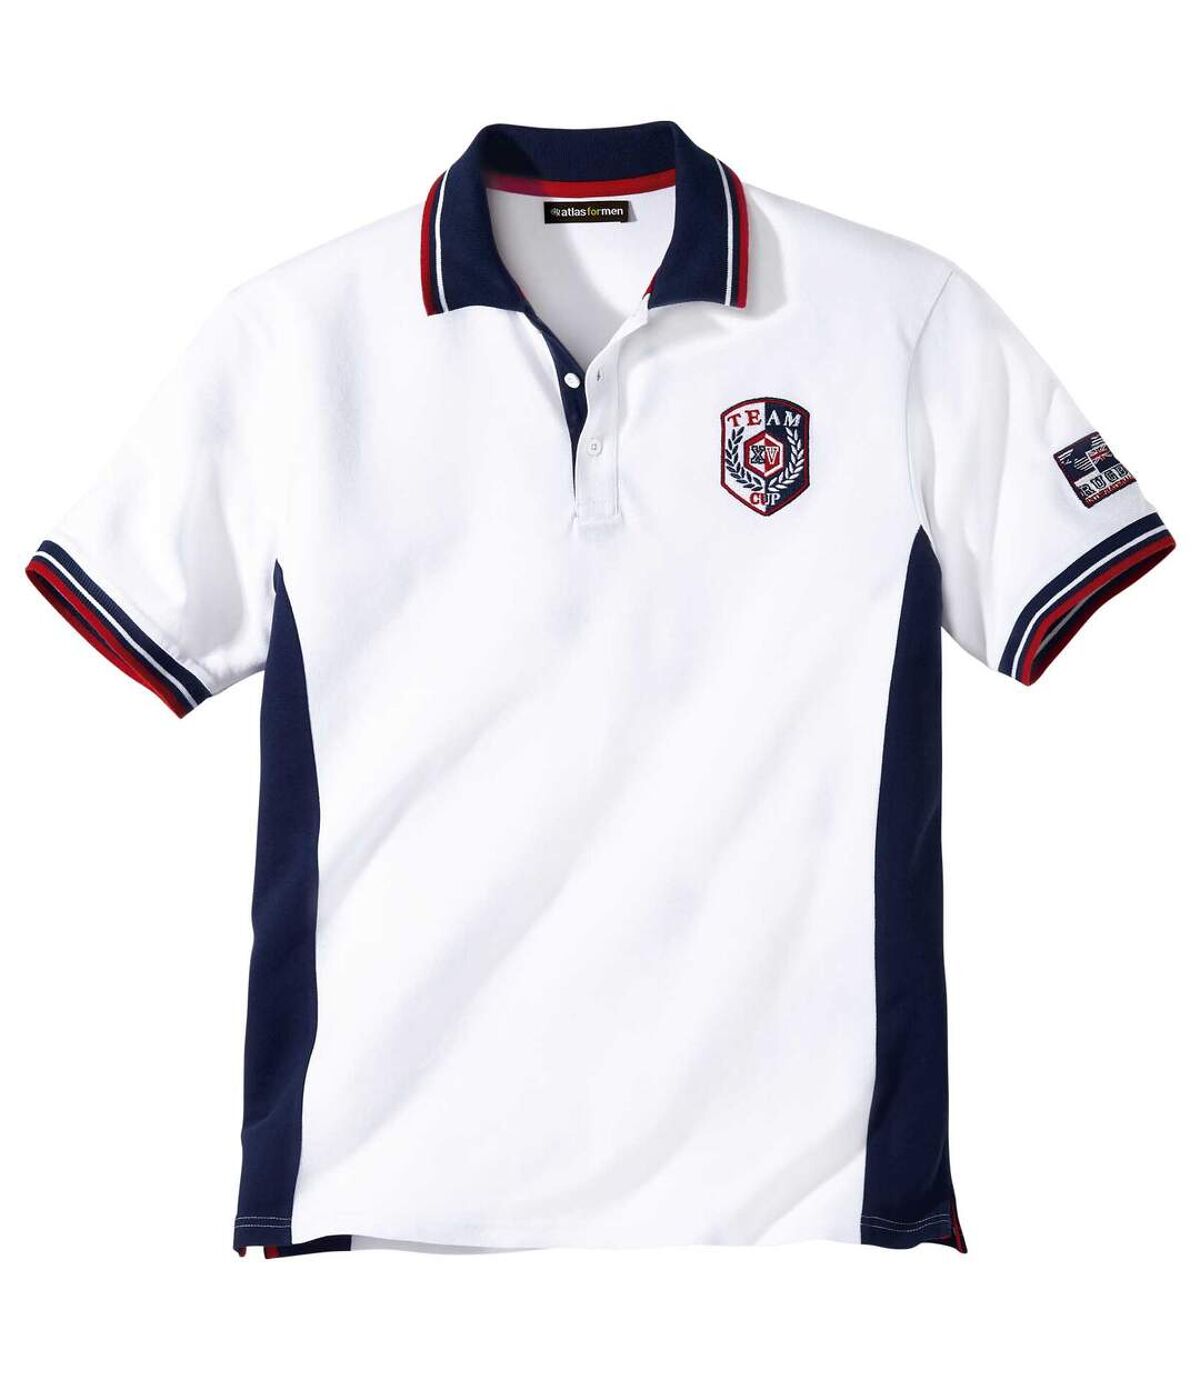  Men's Rugby-Style Polo Shirt Atlas For Men